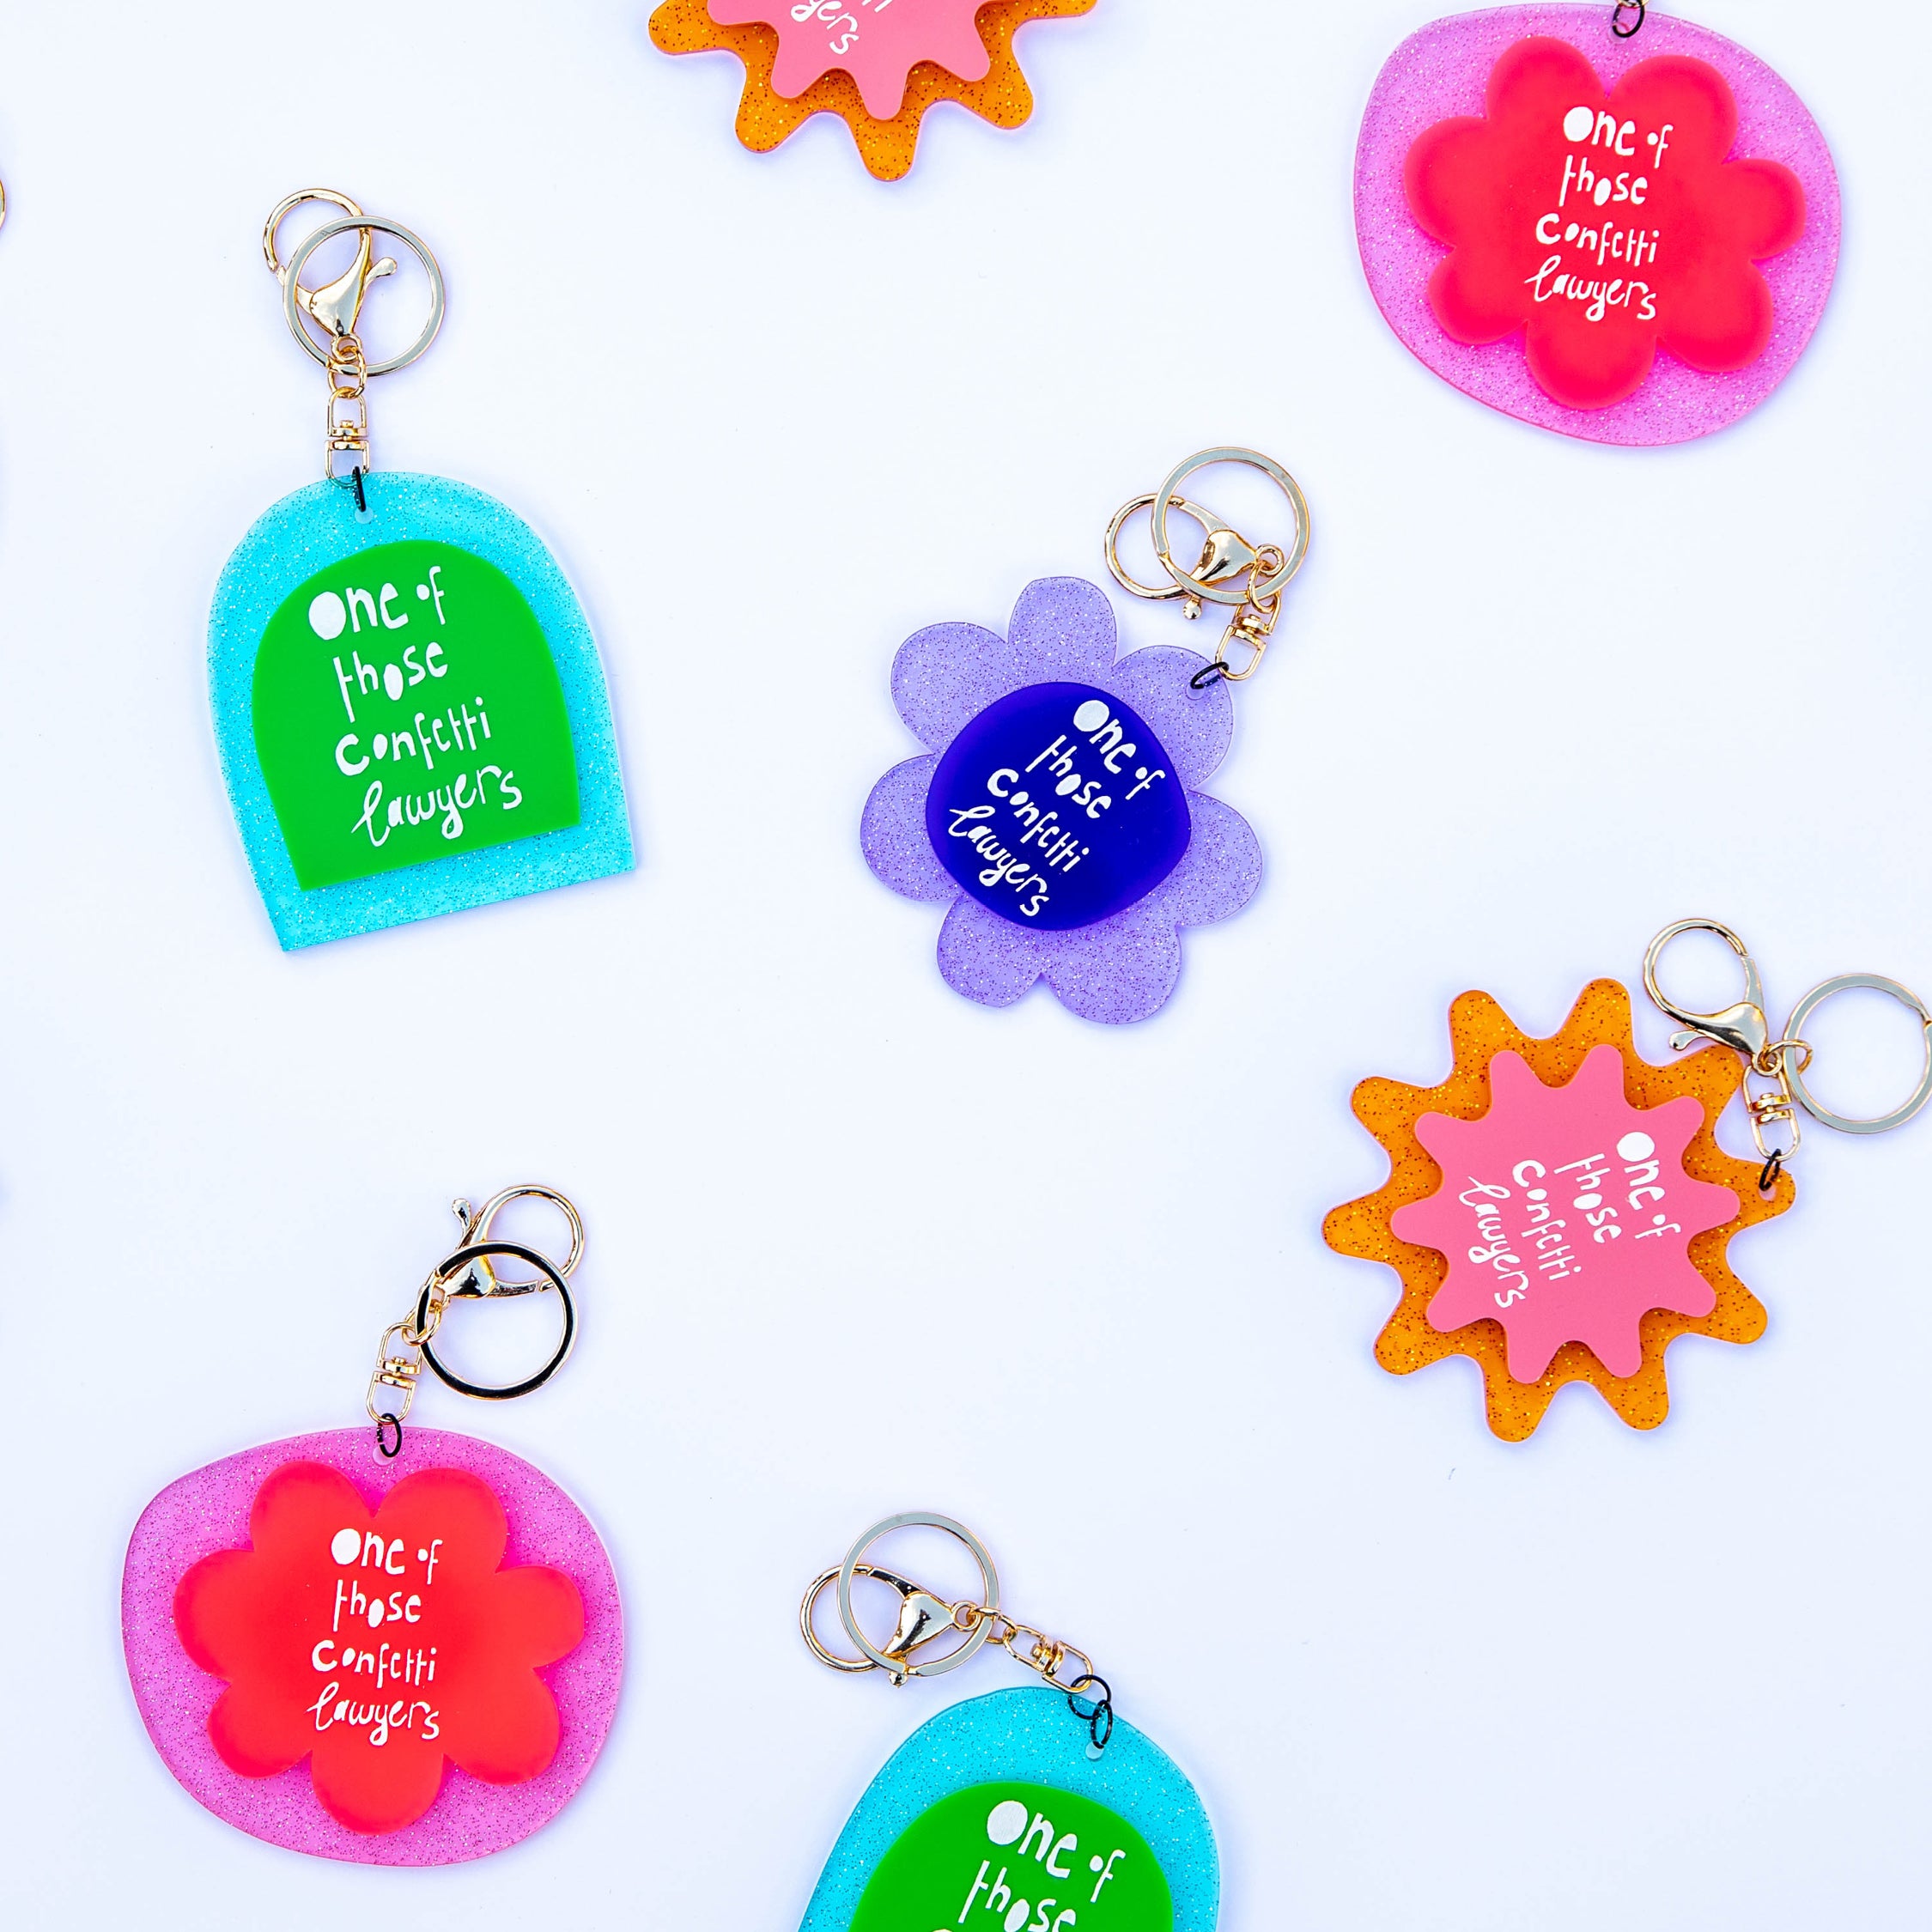 'One of those confetti lawyers' Keychains